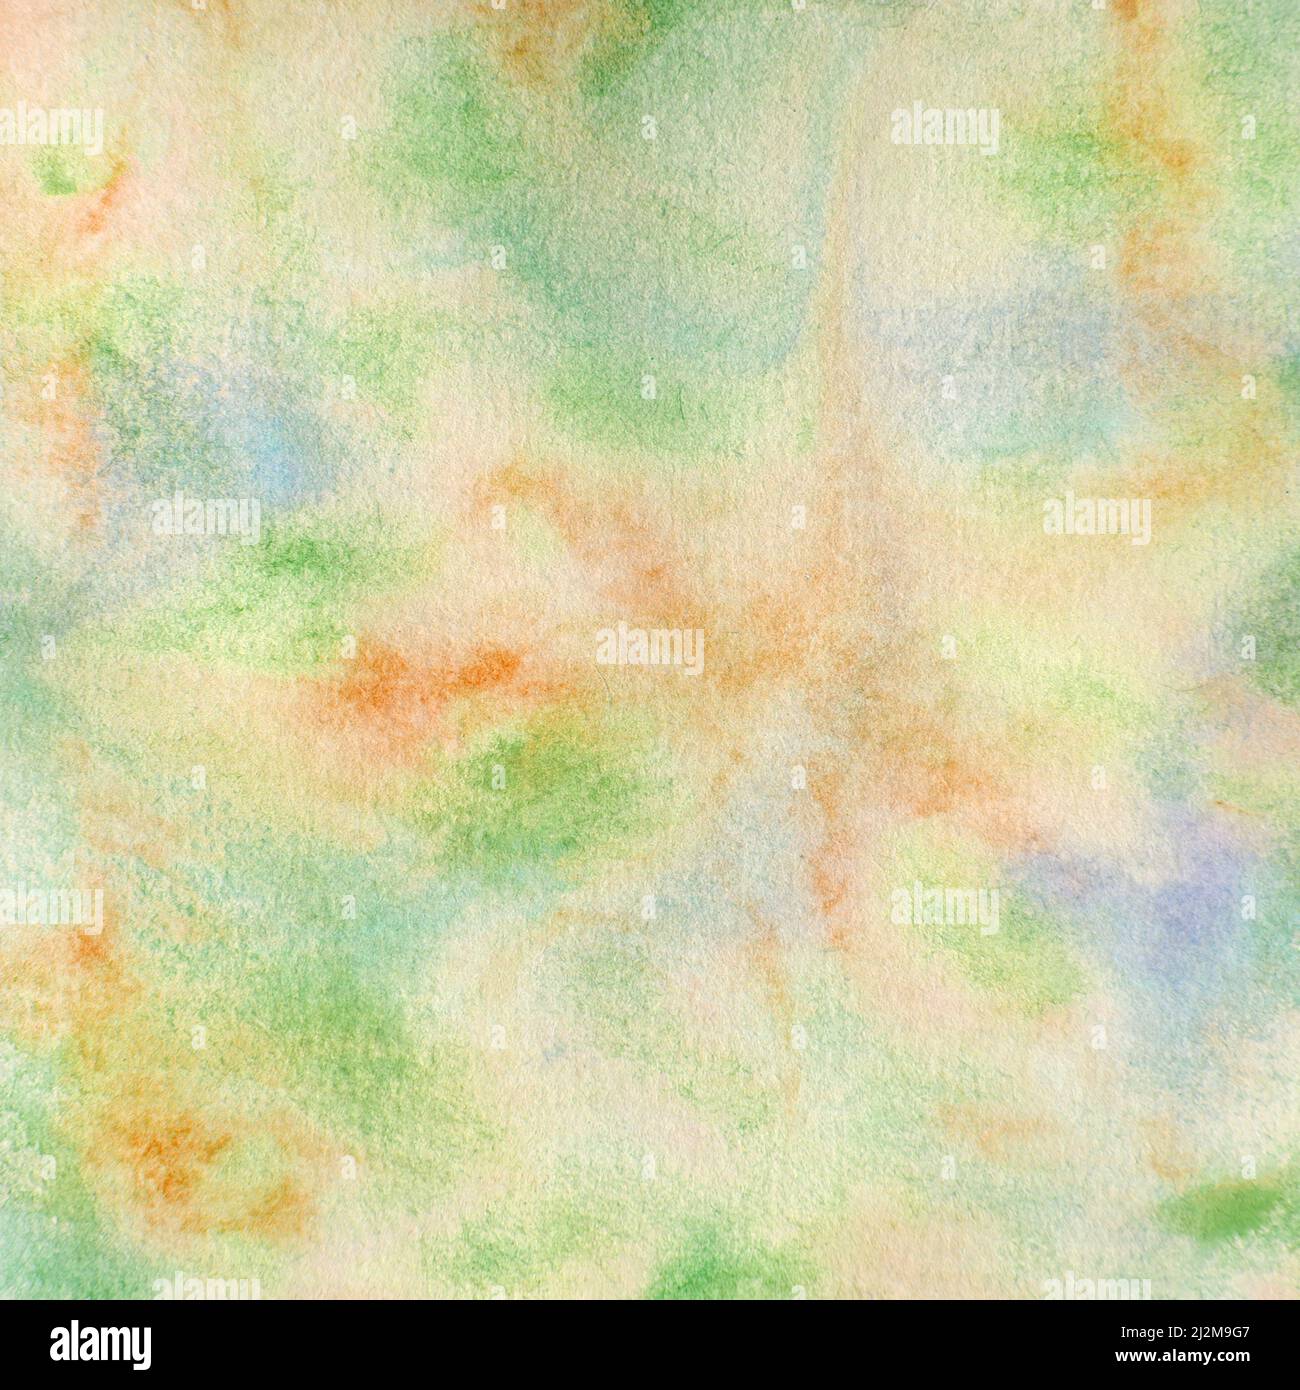 Abstract watercolor background green yellow peach blue shades, a handpainted design element. Stock Photo